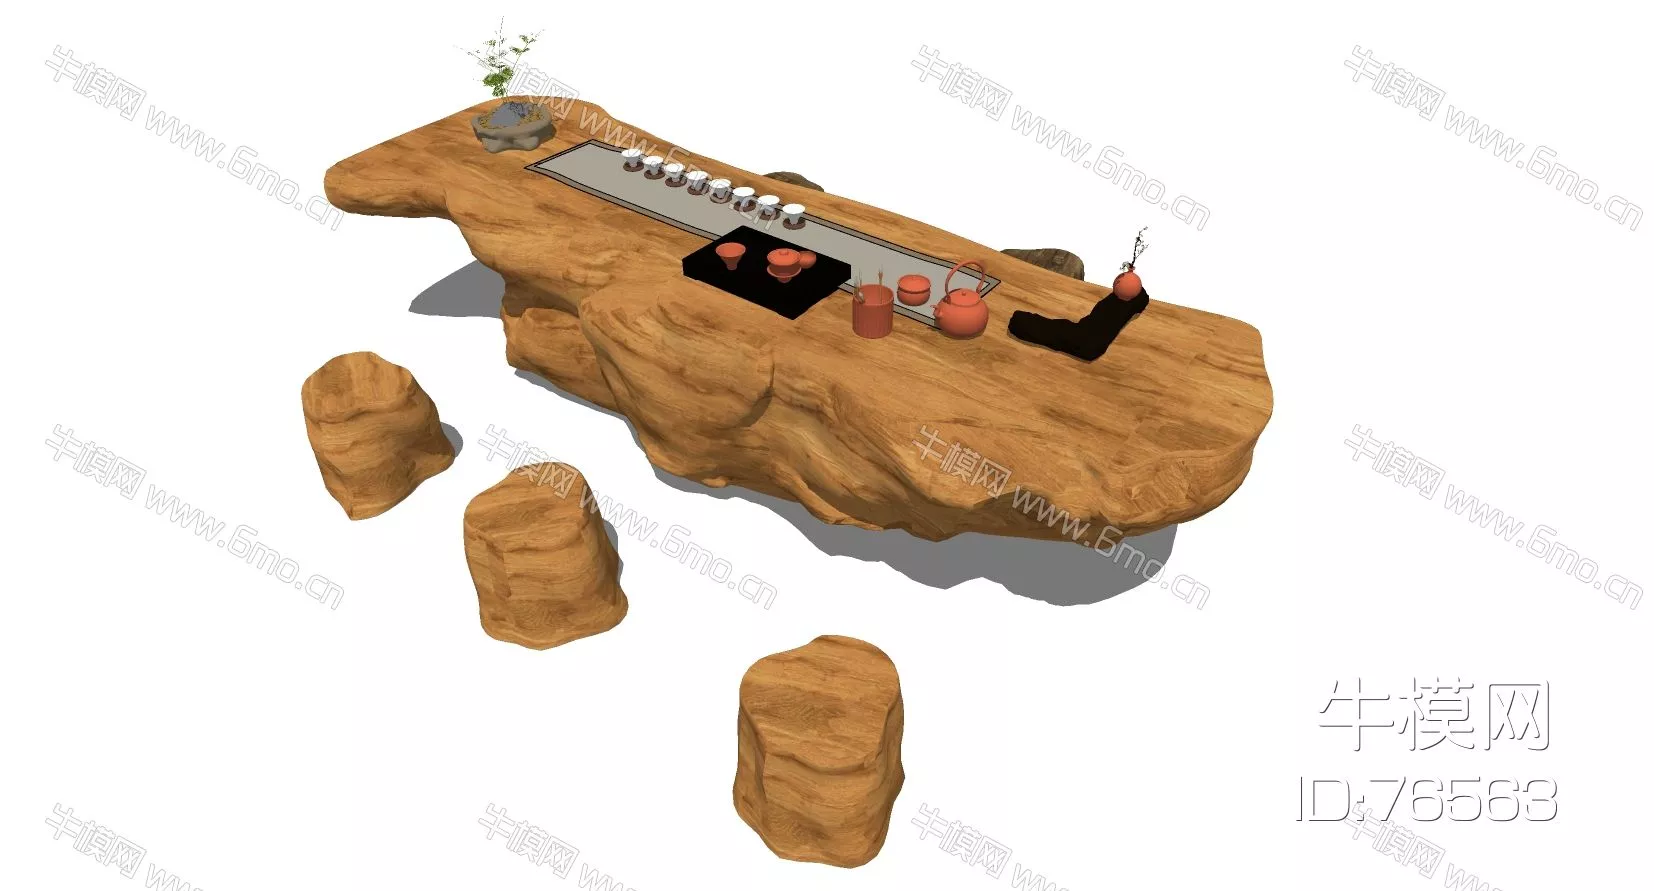 CHINESE COFFEE TABLE - SKETCHUP 3D MODEL - ENSCAPE - 76563